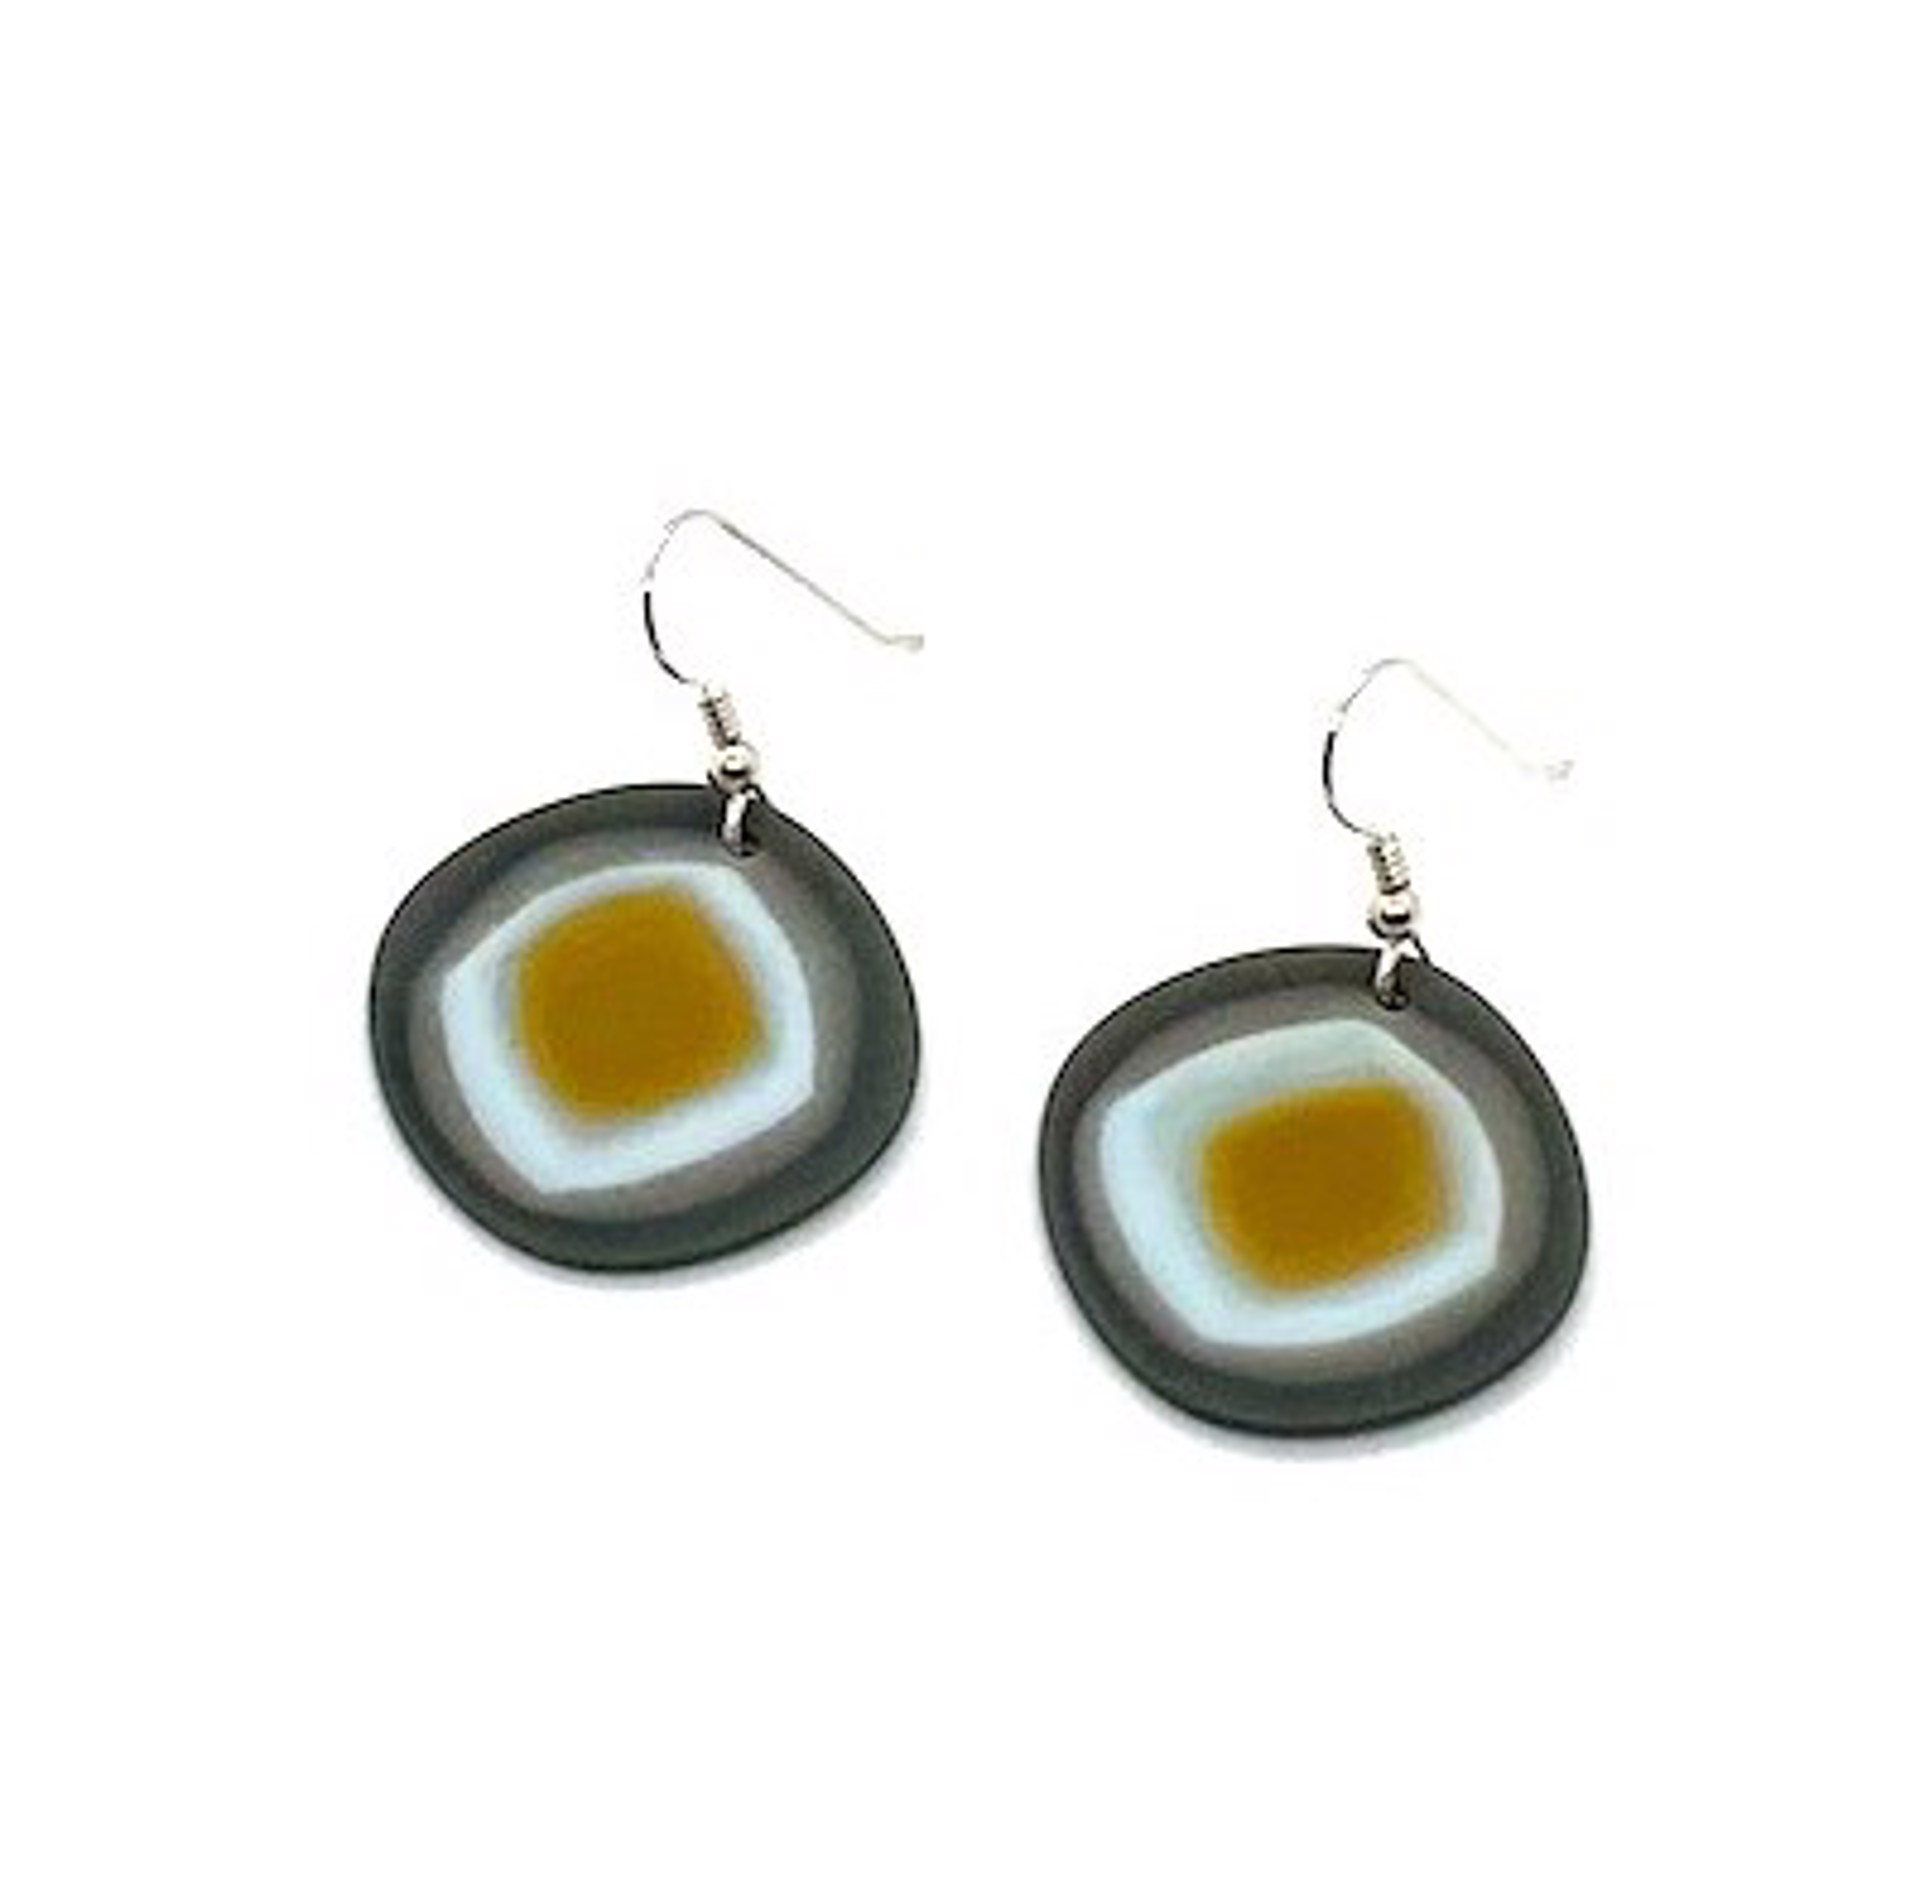 Compressed Glass Earrings - Grey by Chris Cox